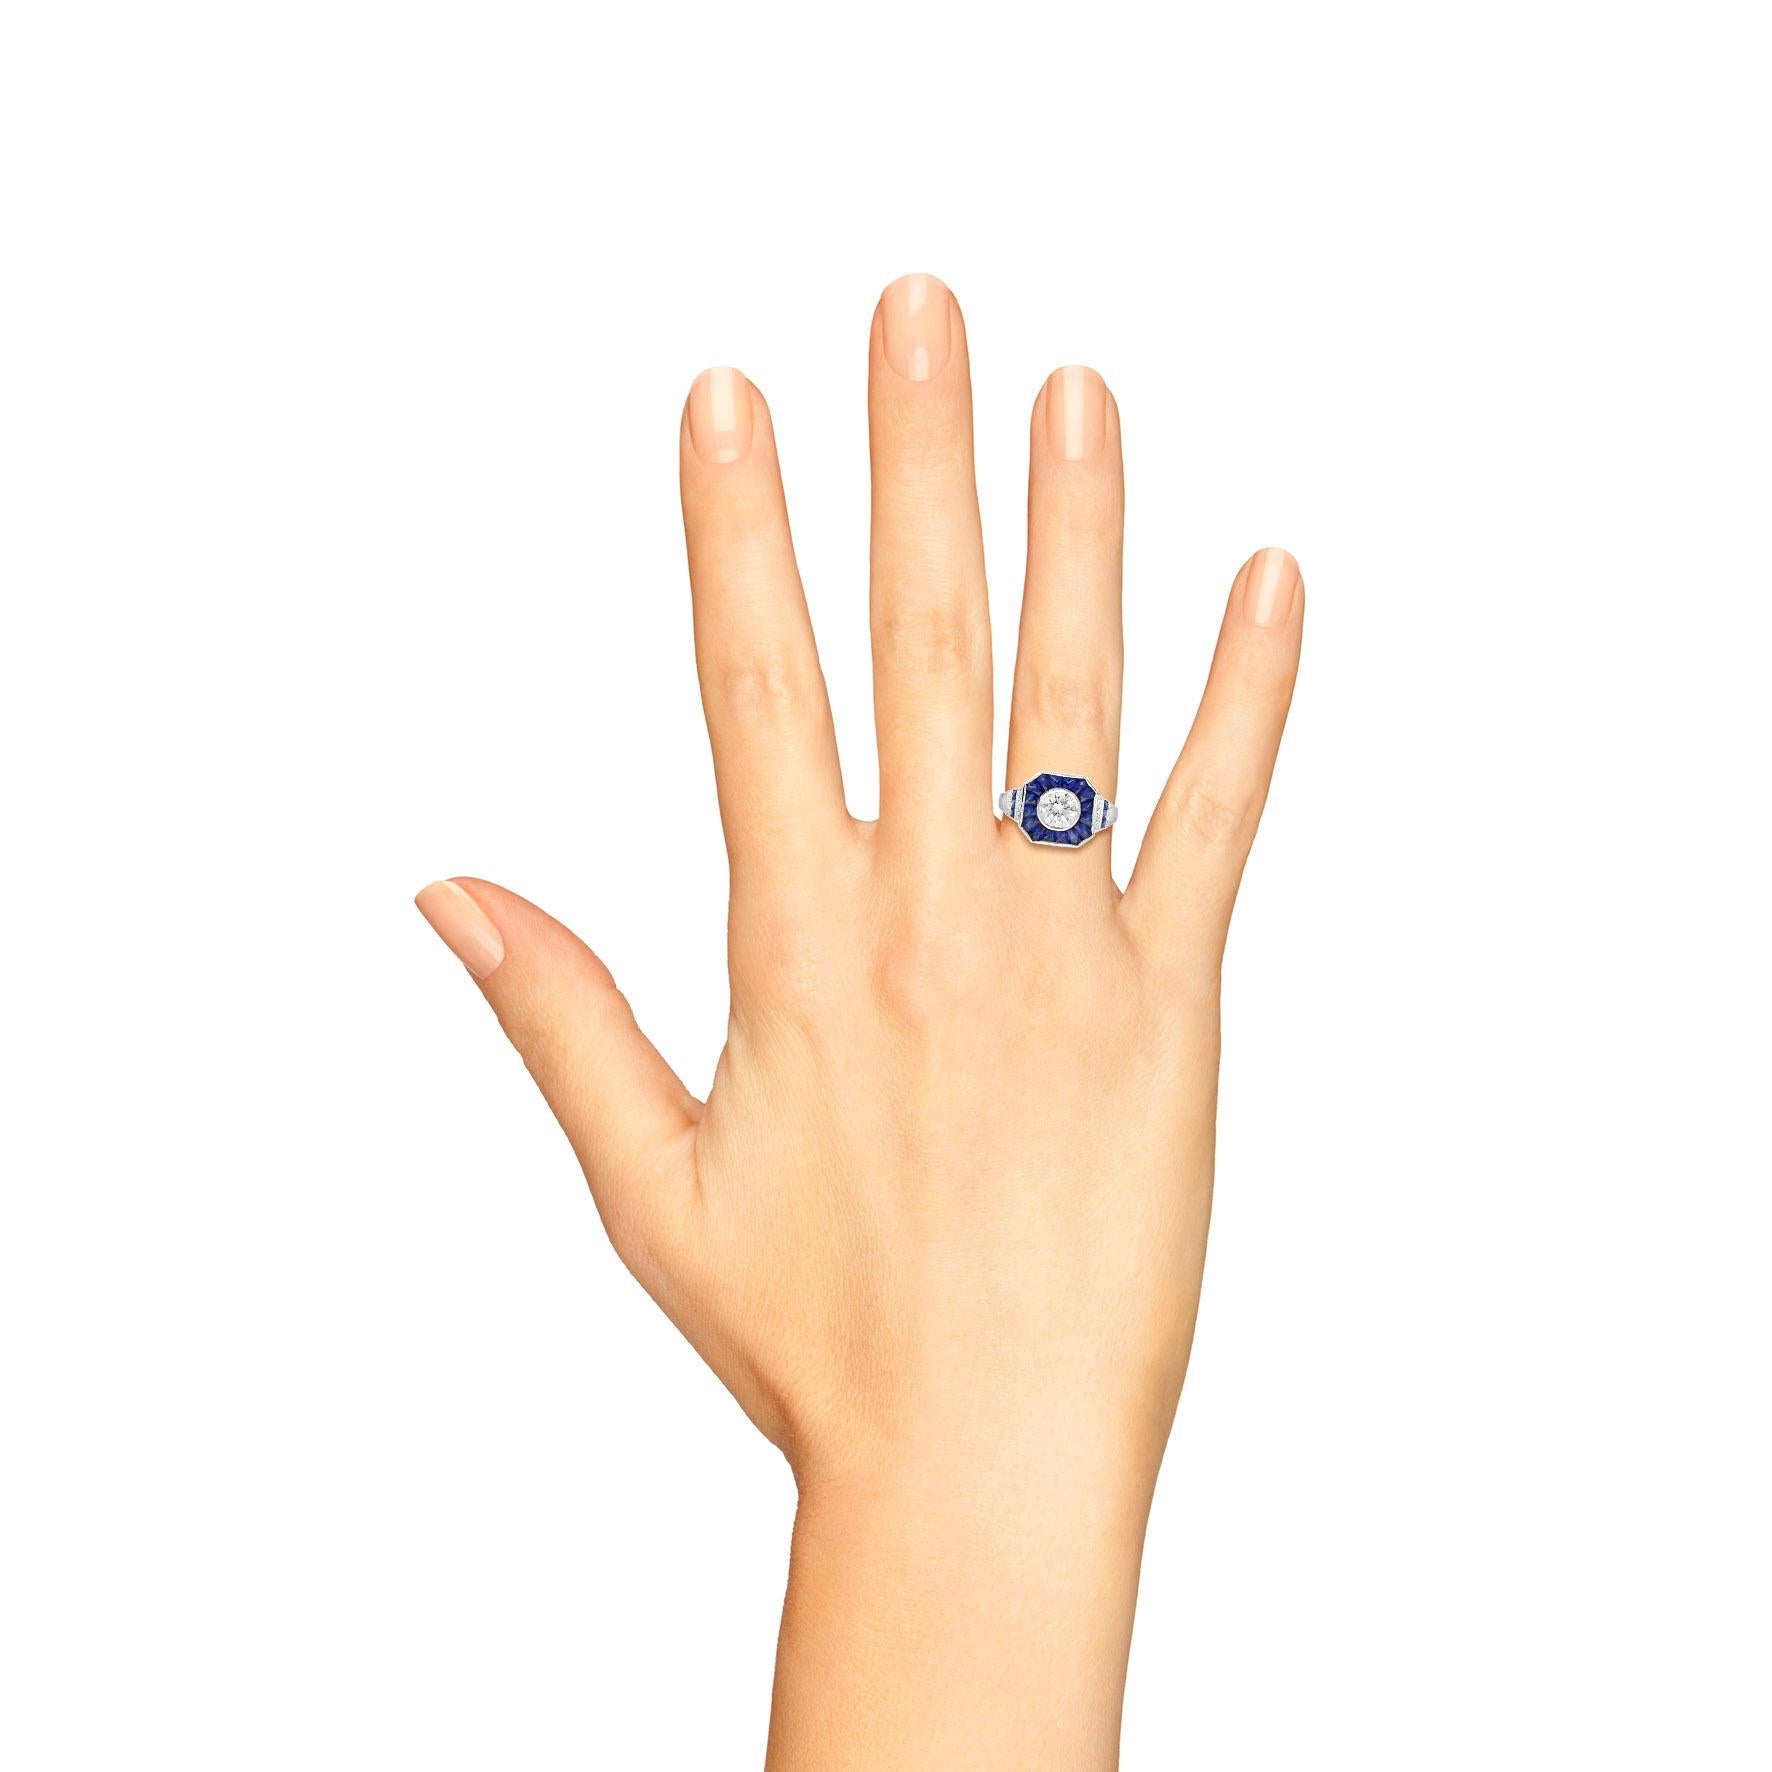 This outstanding diamond and blue sapphire ring features a central 0.75 carat round brilliant cut diamond set in bezel and surrounded by a halo of French cut blue sapphire with milgrain detailing, modelled in white gold. This stunning ring would